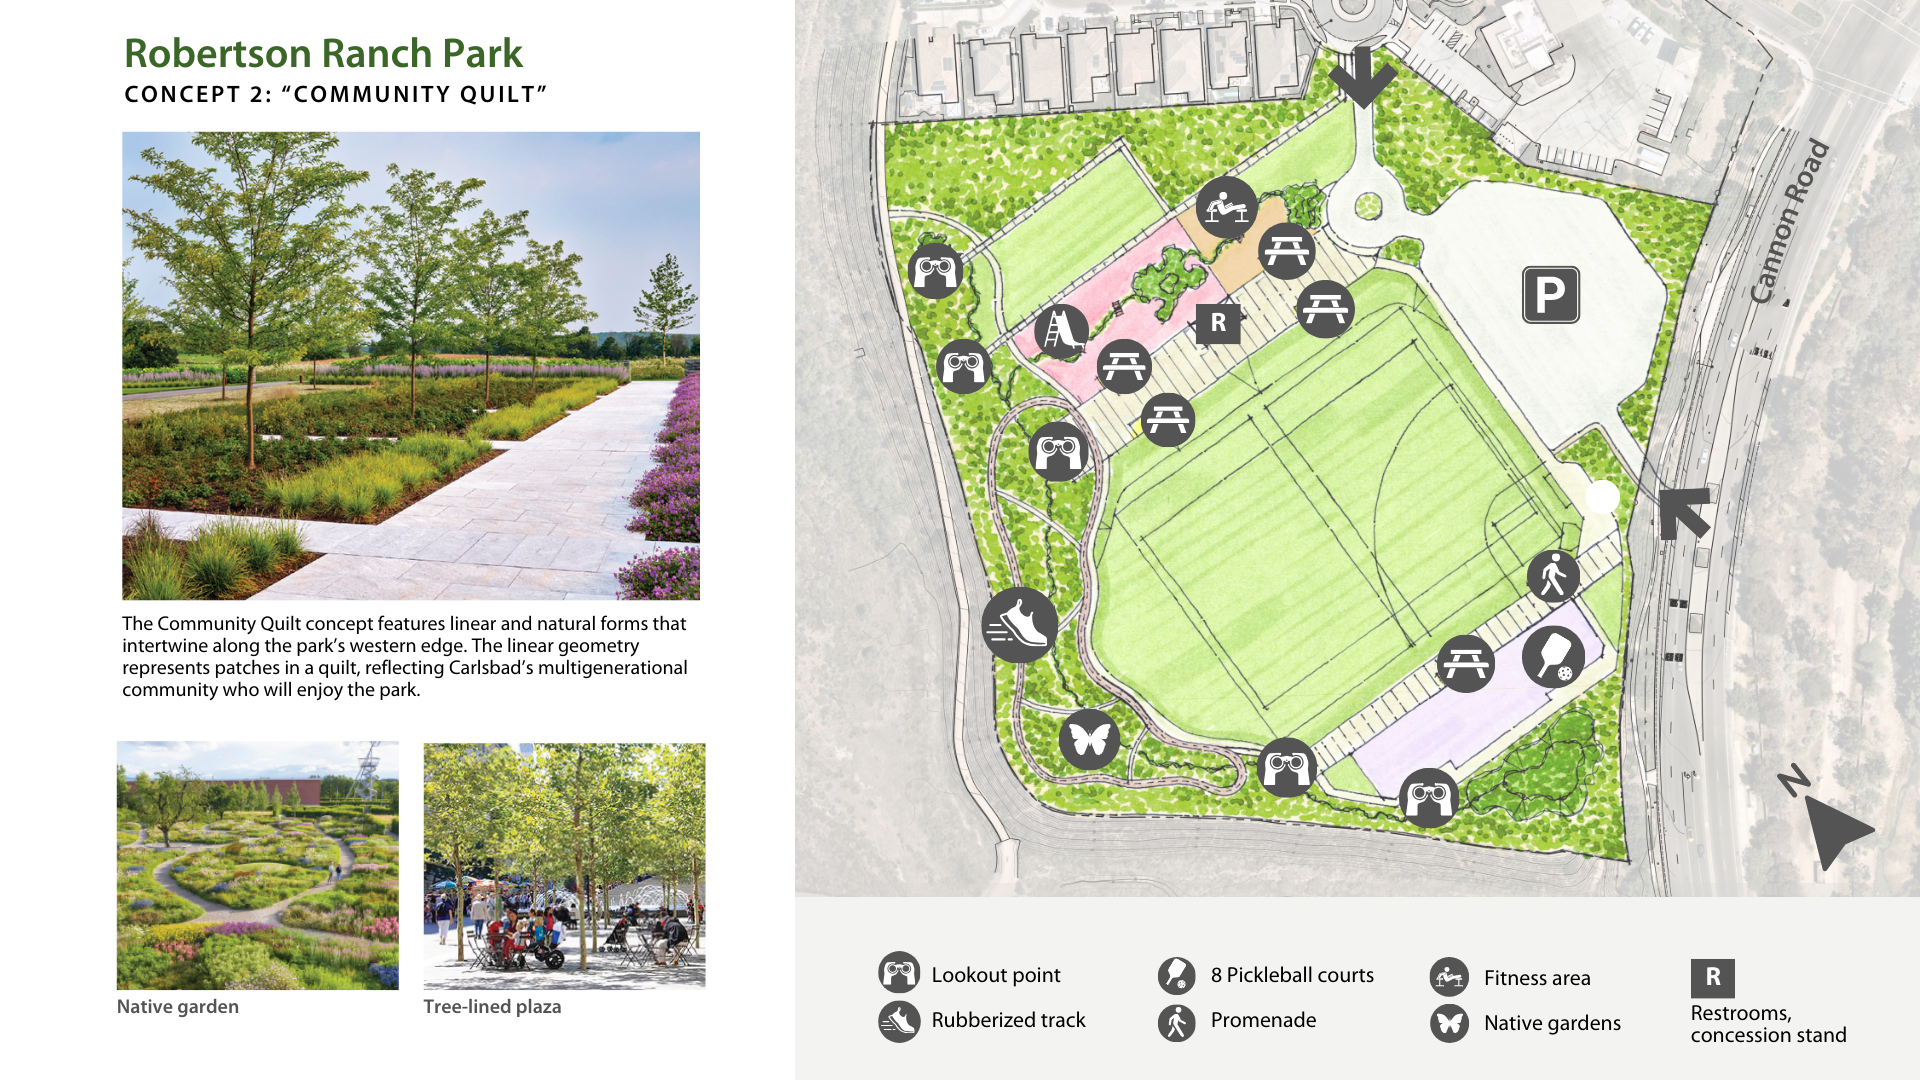 An at a glance view shows the primary features and amenities of the Community Quilt park design concept and some inspiration imagery.